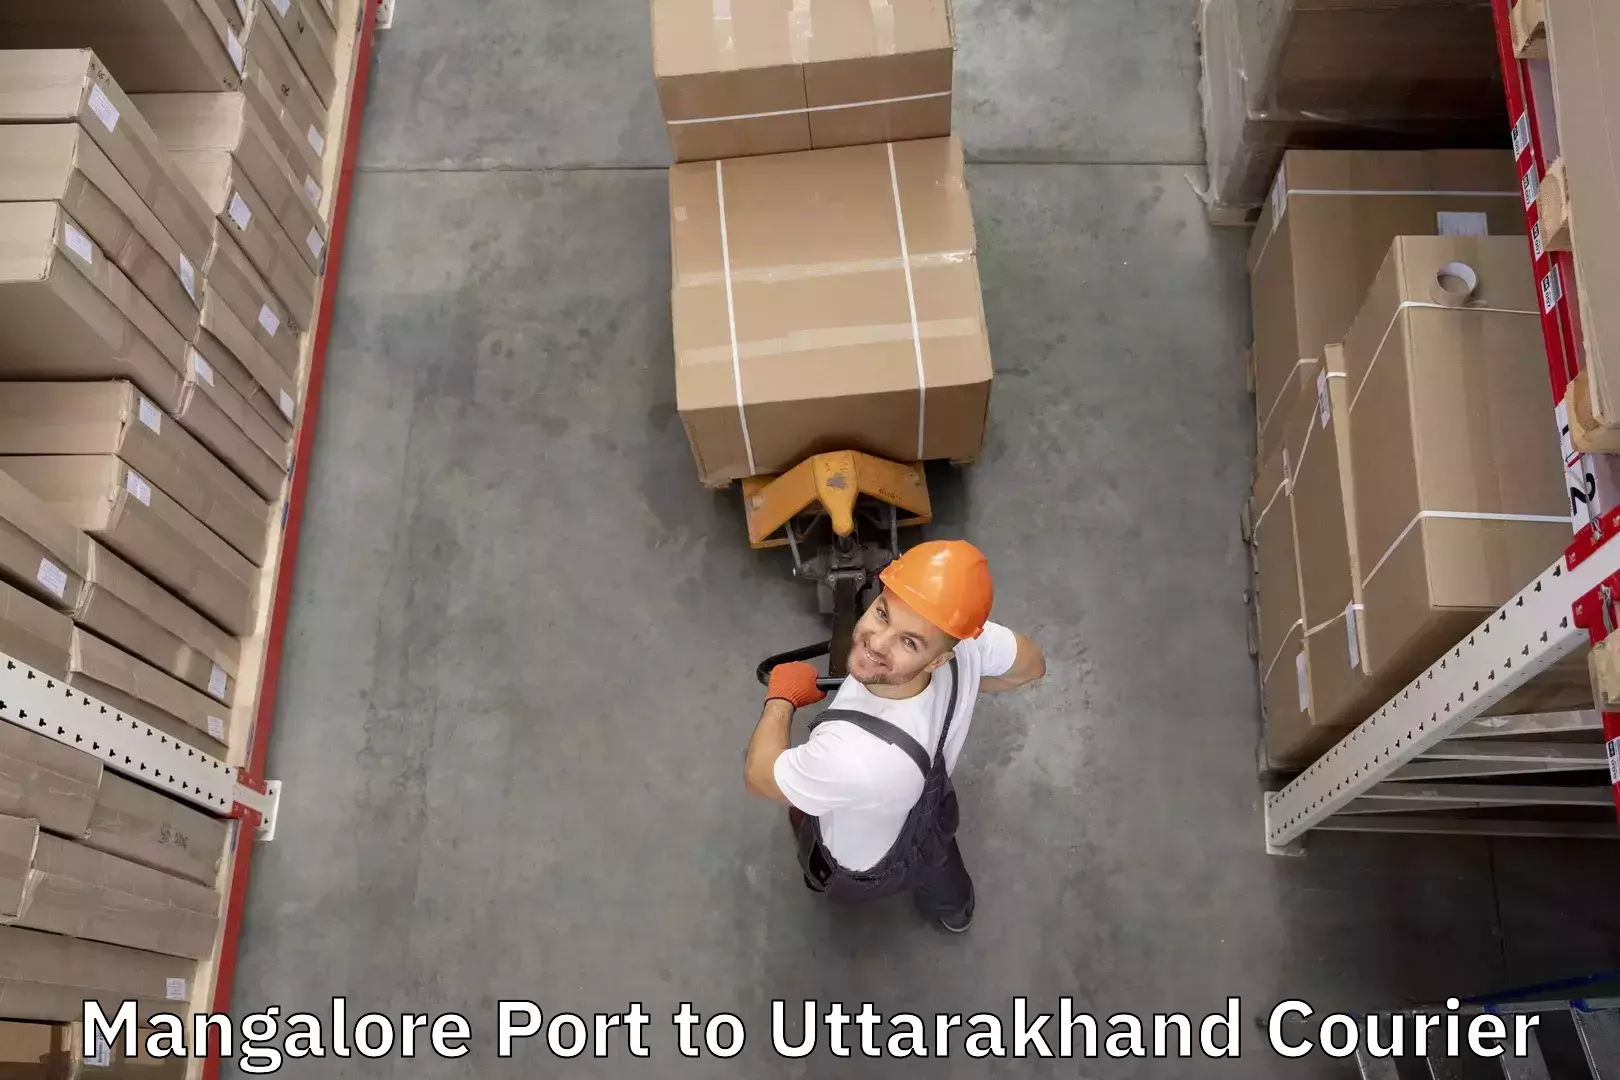 Luggage transport consulting Mangalore Port to Nainital